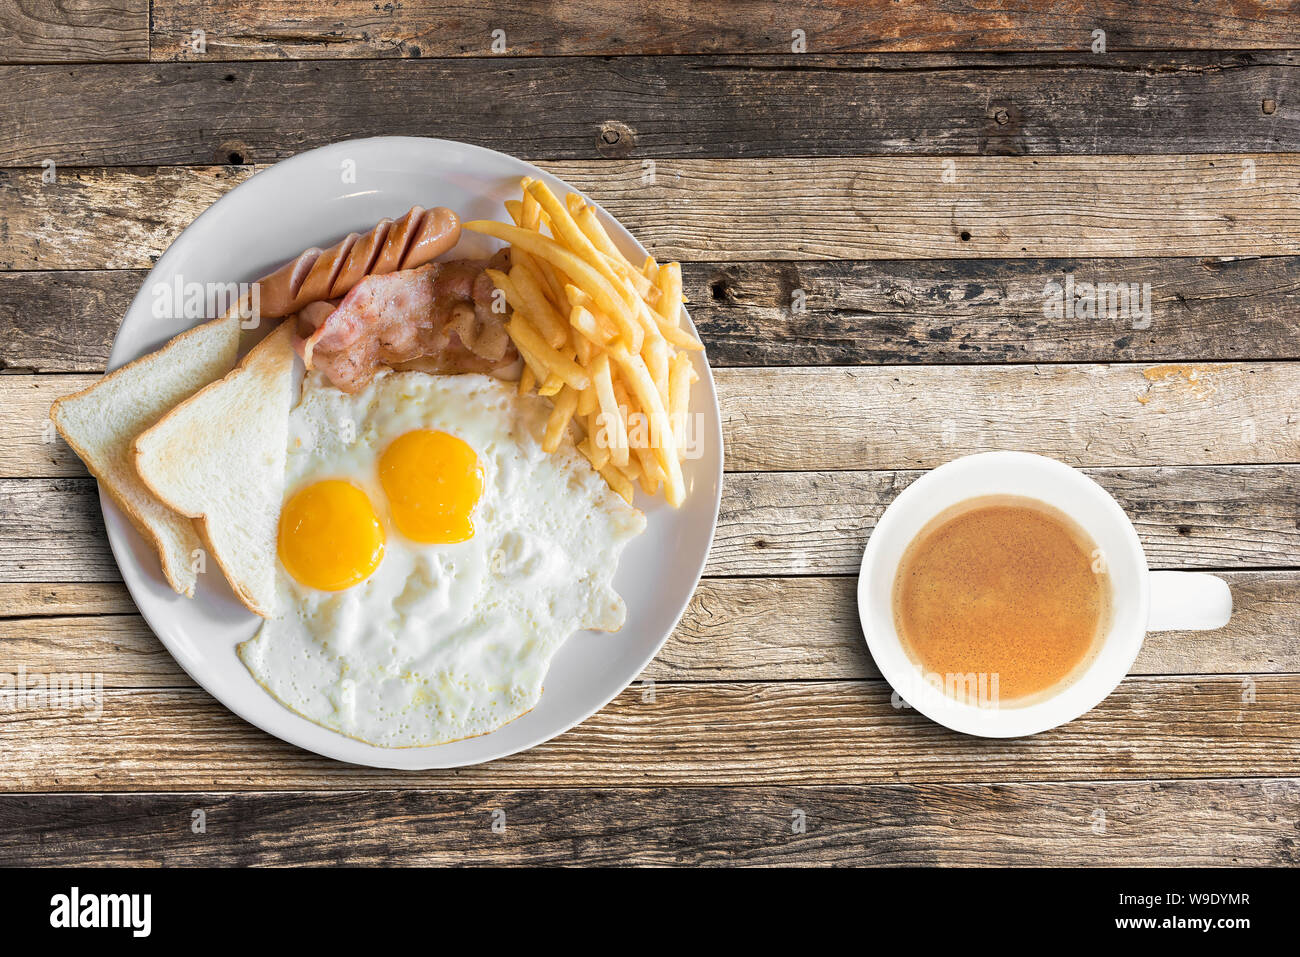 Top view of american breakfast with scrambled eggs and coffee cup on wooden table background. Stock Photo